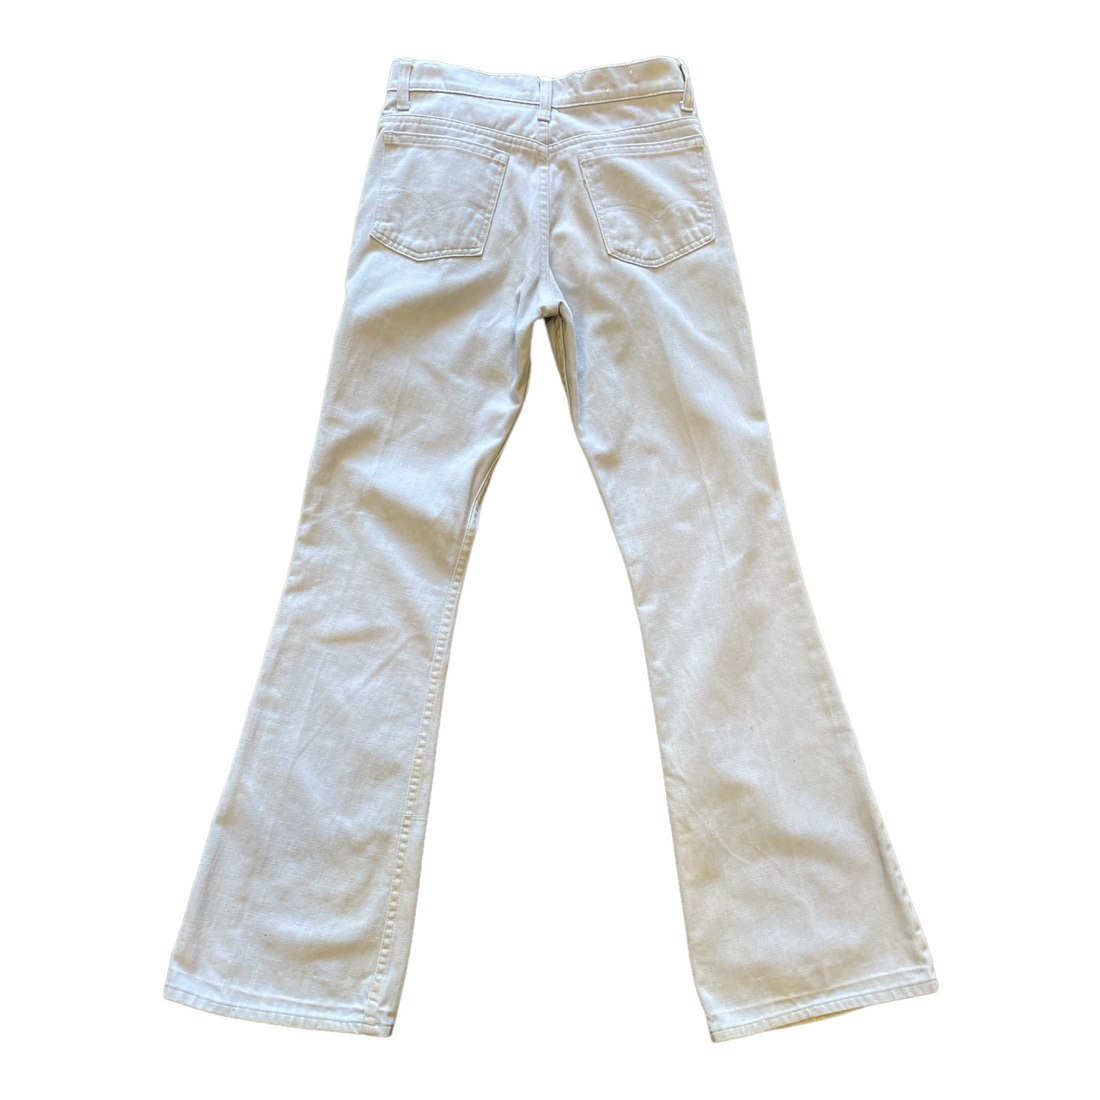 LEVI’S WHITE TAB BELL BOTTOMS BABY BLUE ‘26X33’ - 1970S